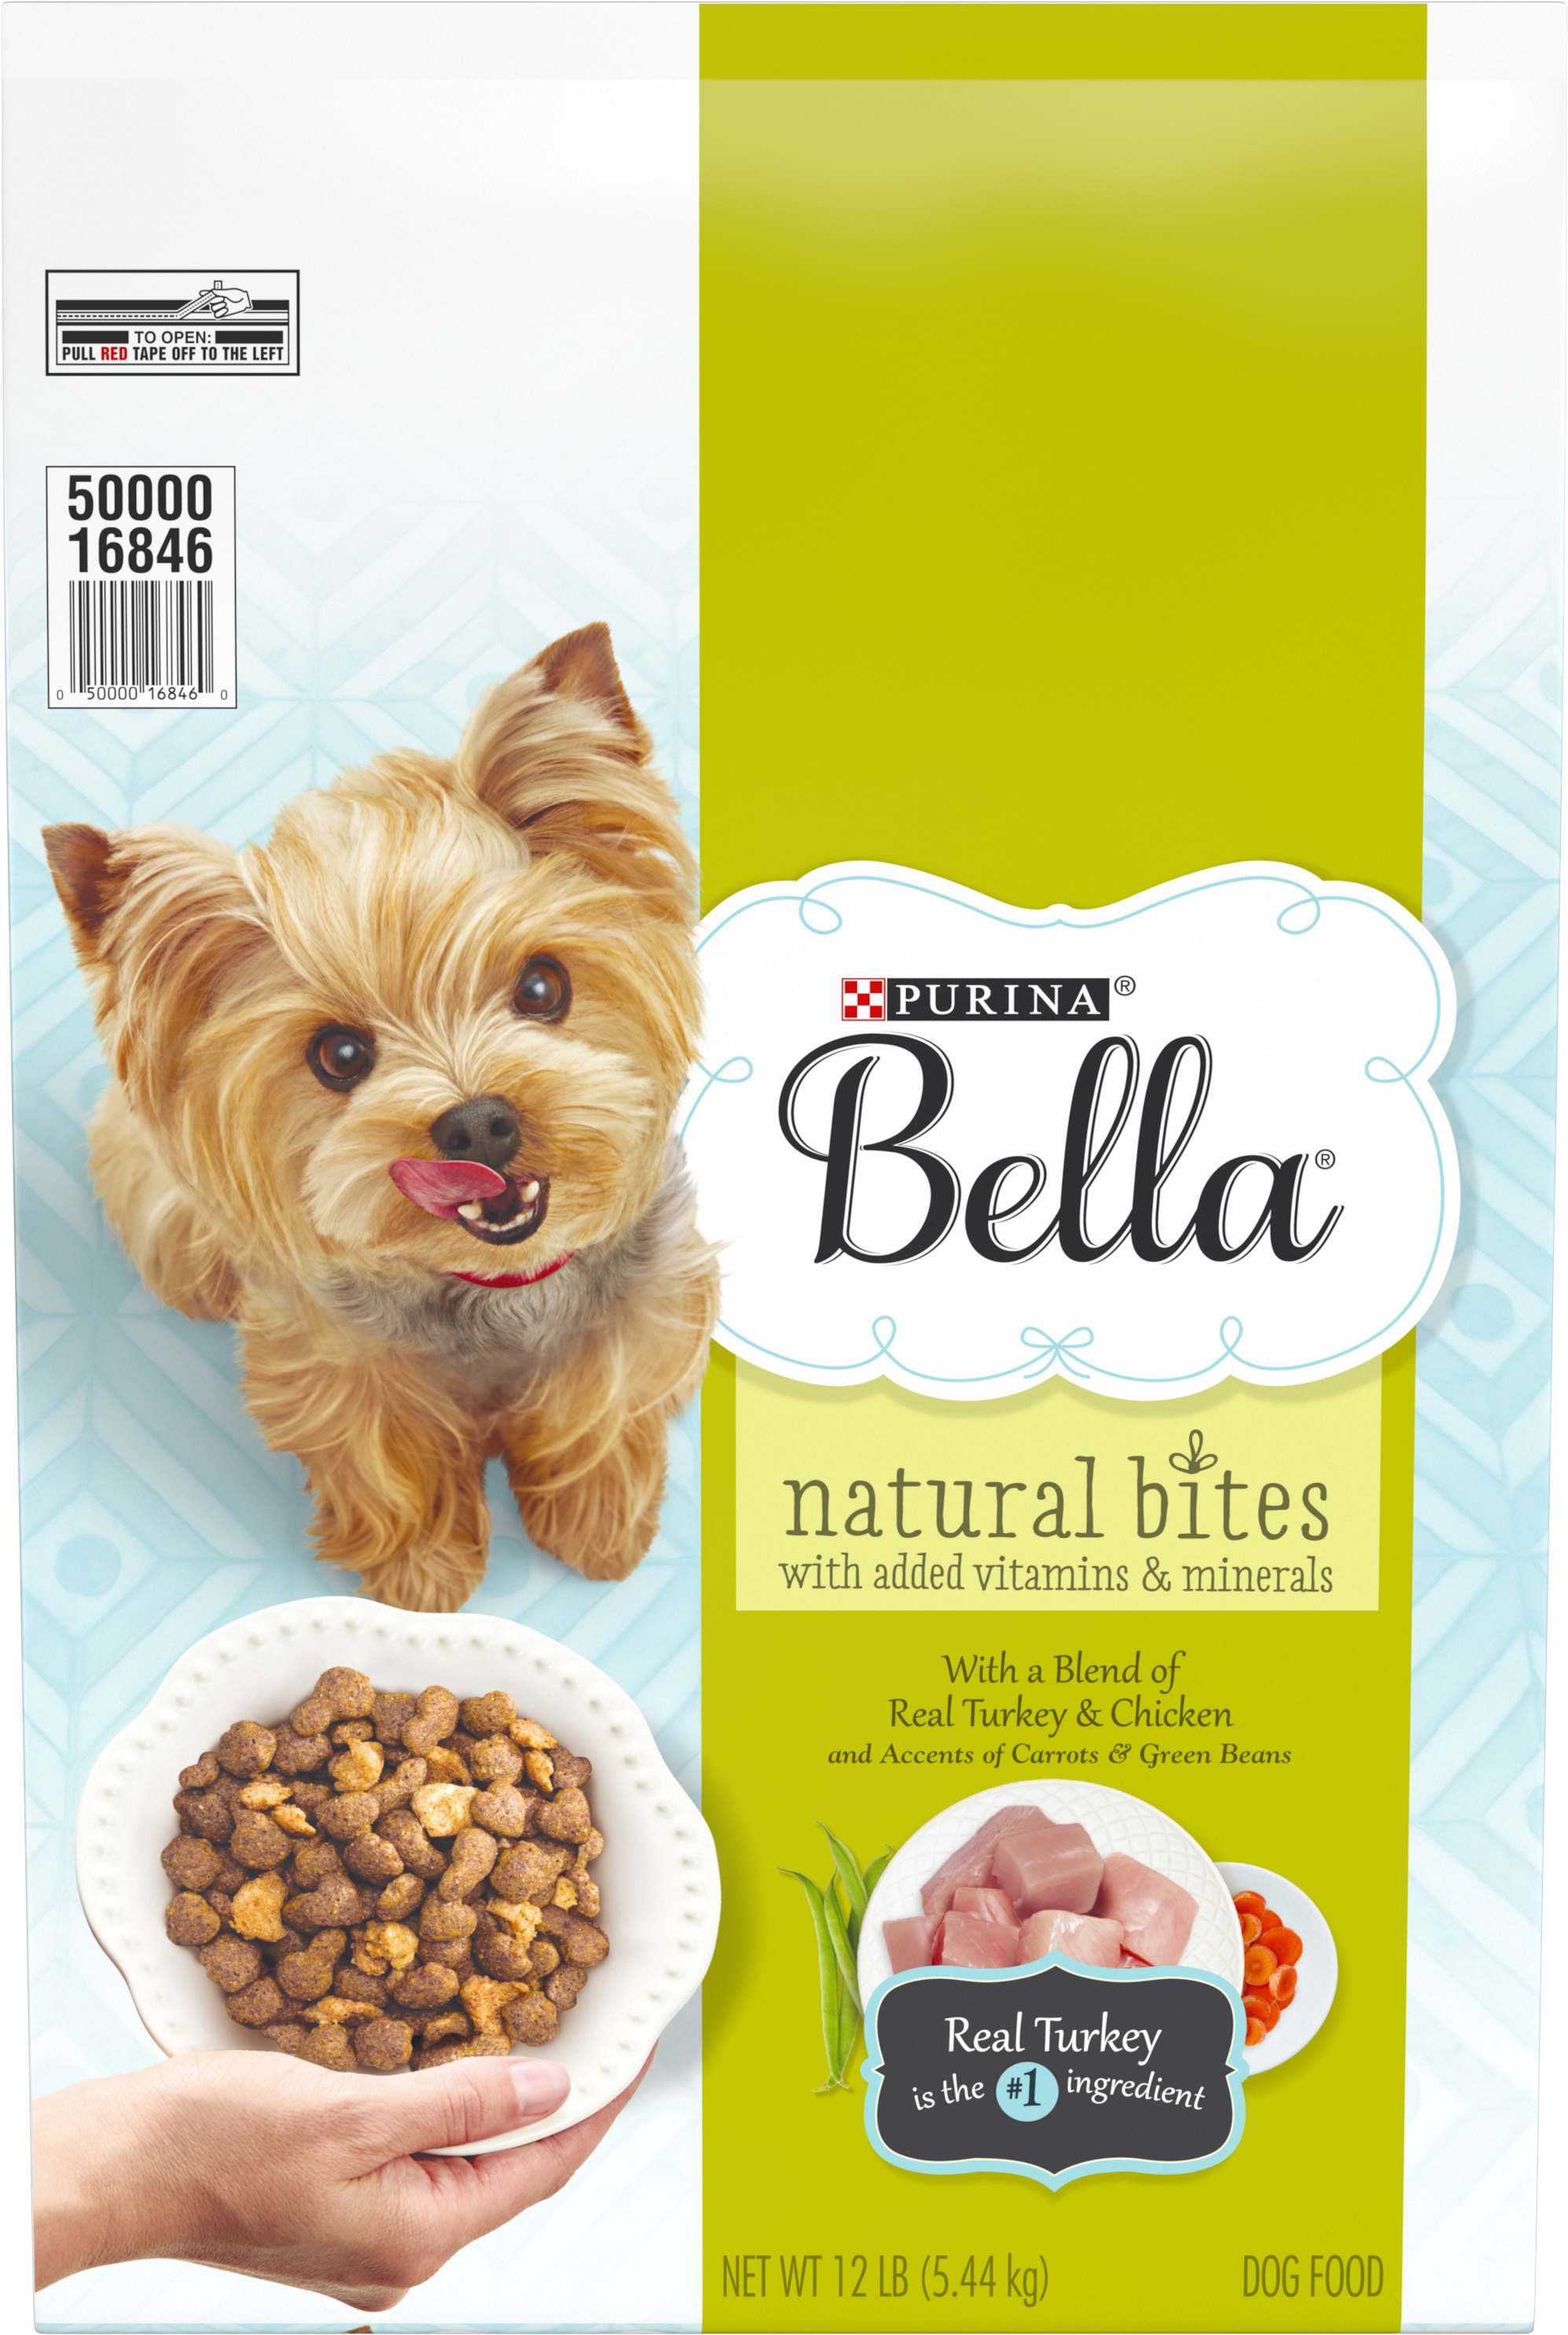 A Dog Food Package With A Dog And A Picture Of A Dog